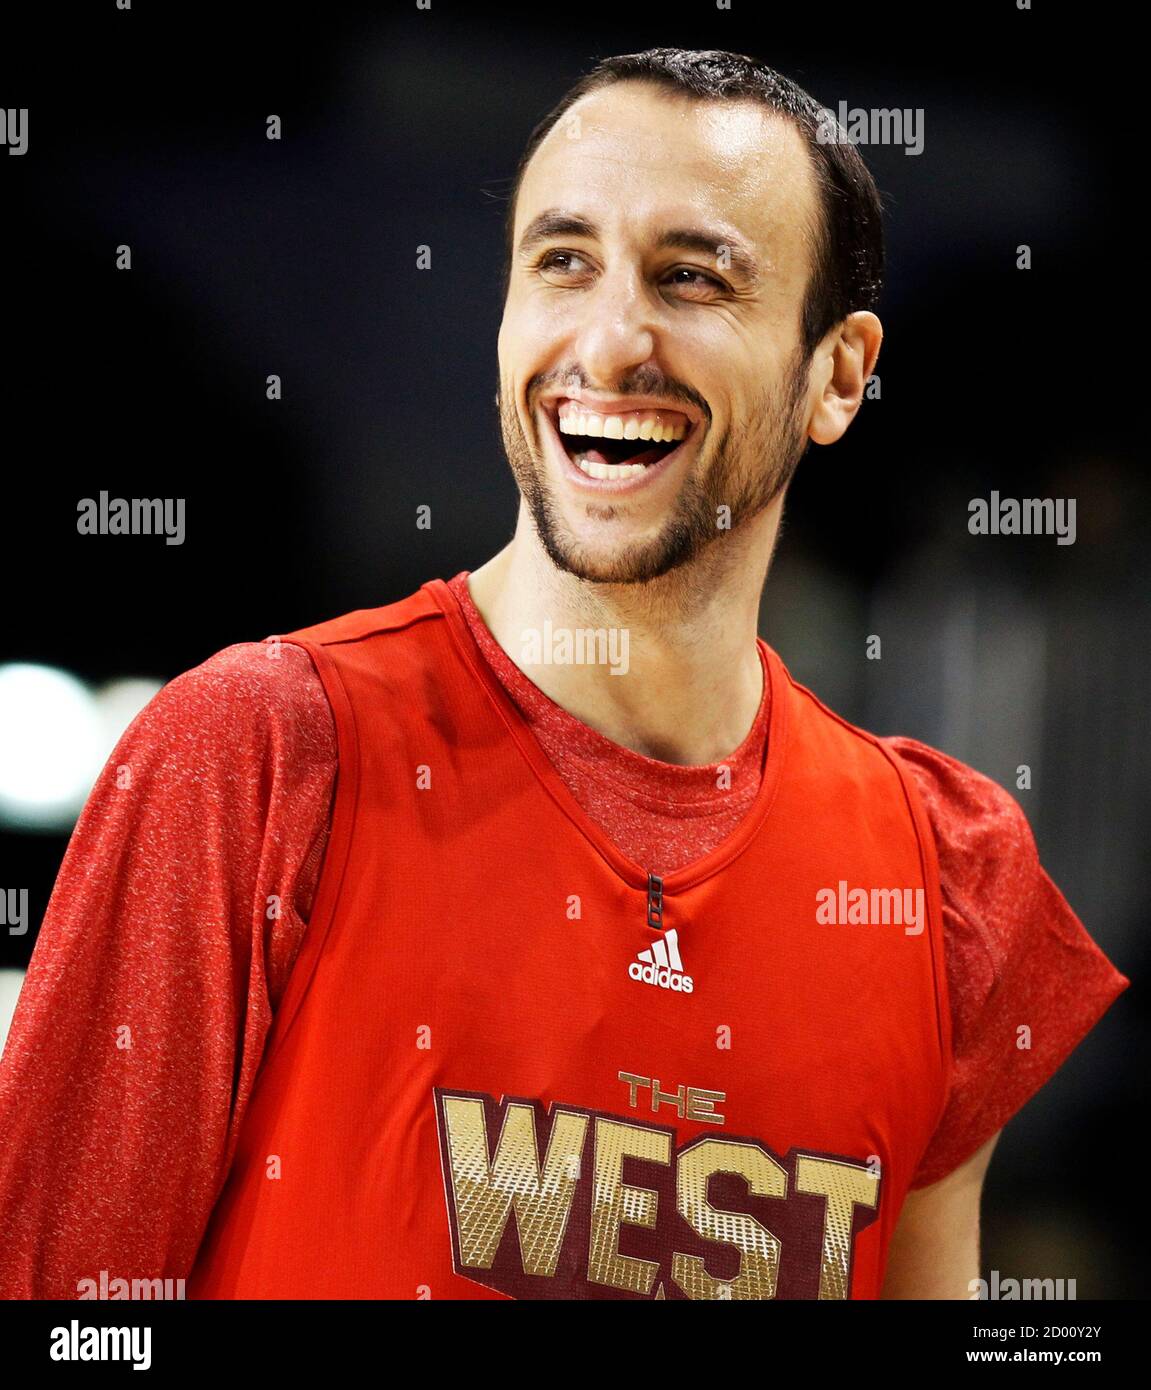 West Team's Manu Ginobili, who is on the San Antonio Spurs NBA team, laughs  during practice for the NBA All-Star game in Los Angeles, California,  February 19, 2011. REUTERS/Lucy Nicholson (UNITED STATES -